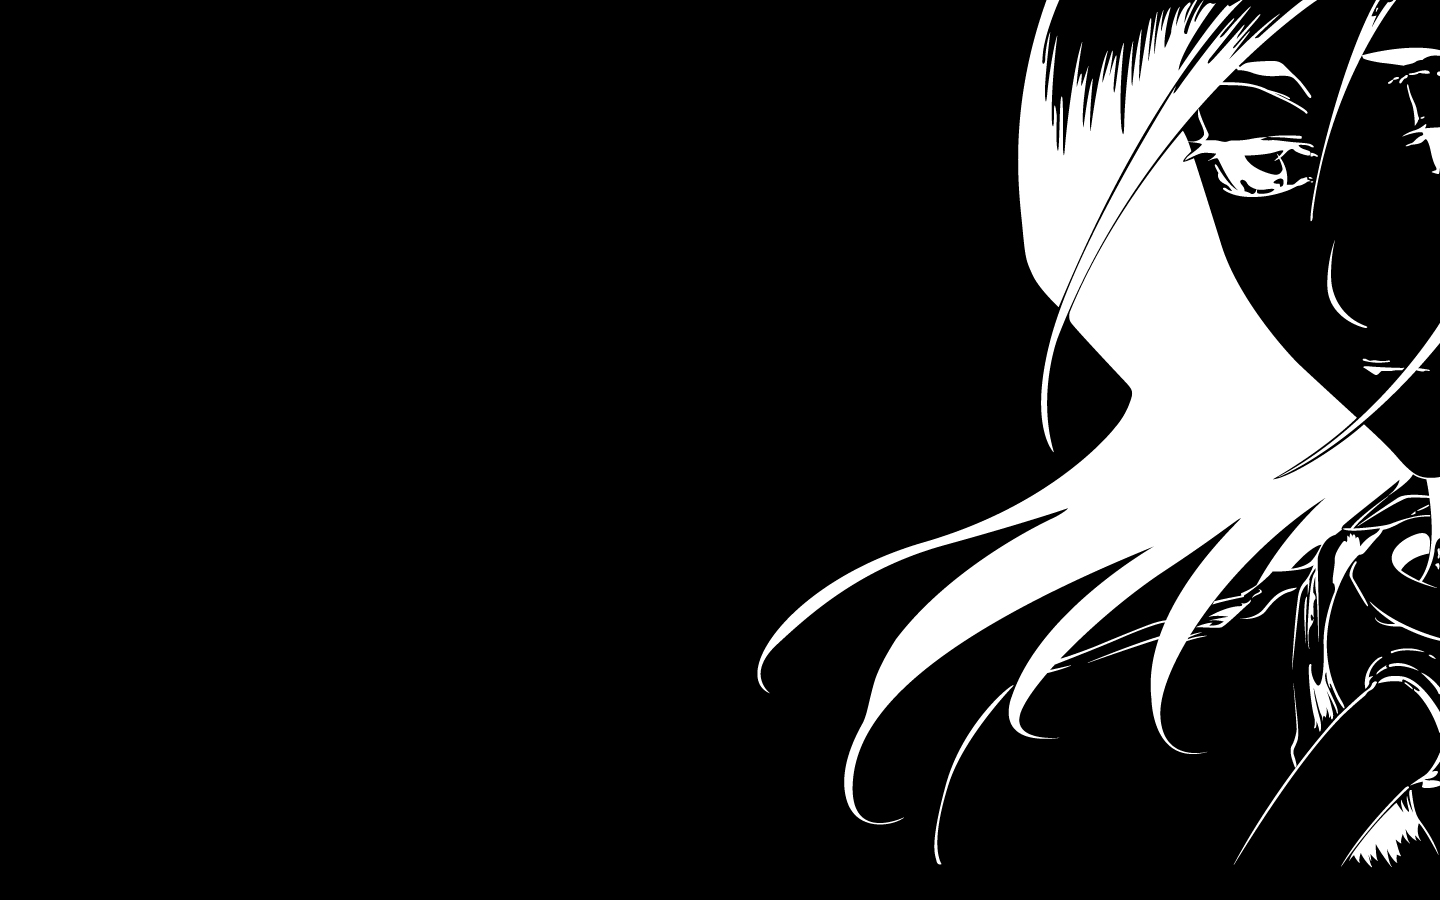 Anime vectors Wallpapers Images Photos Pictures Backgrounds